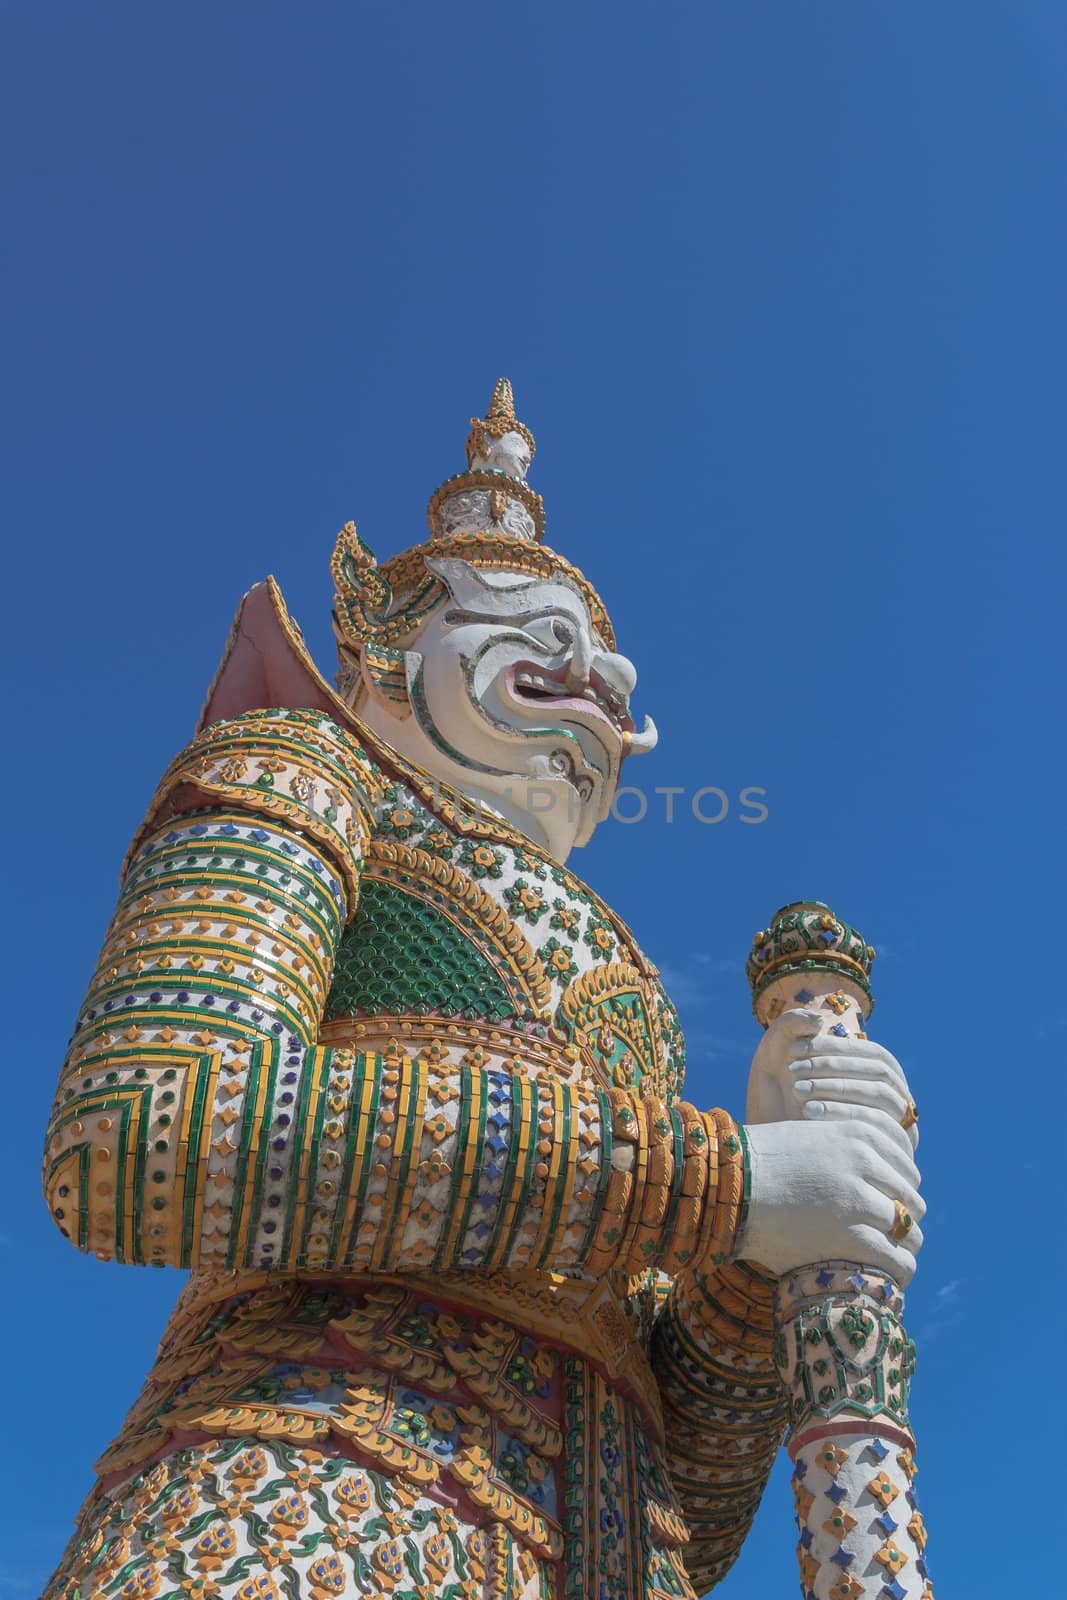 Demon Guardian statue at the Temple of Dawn was beautifully decorated with tiny pieces of colored ceramics and Chinese porcelain placed delicately into intricate patterns. It is one of Bangkok's world-famous landmarks.